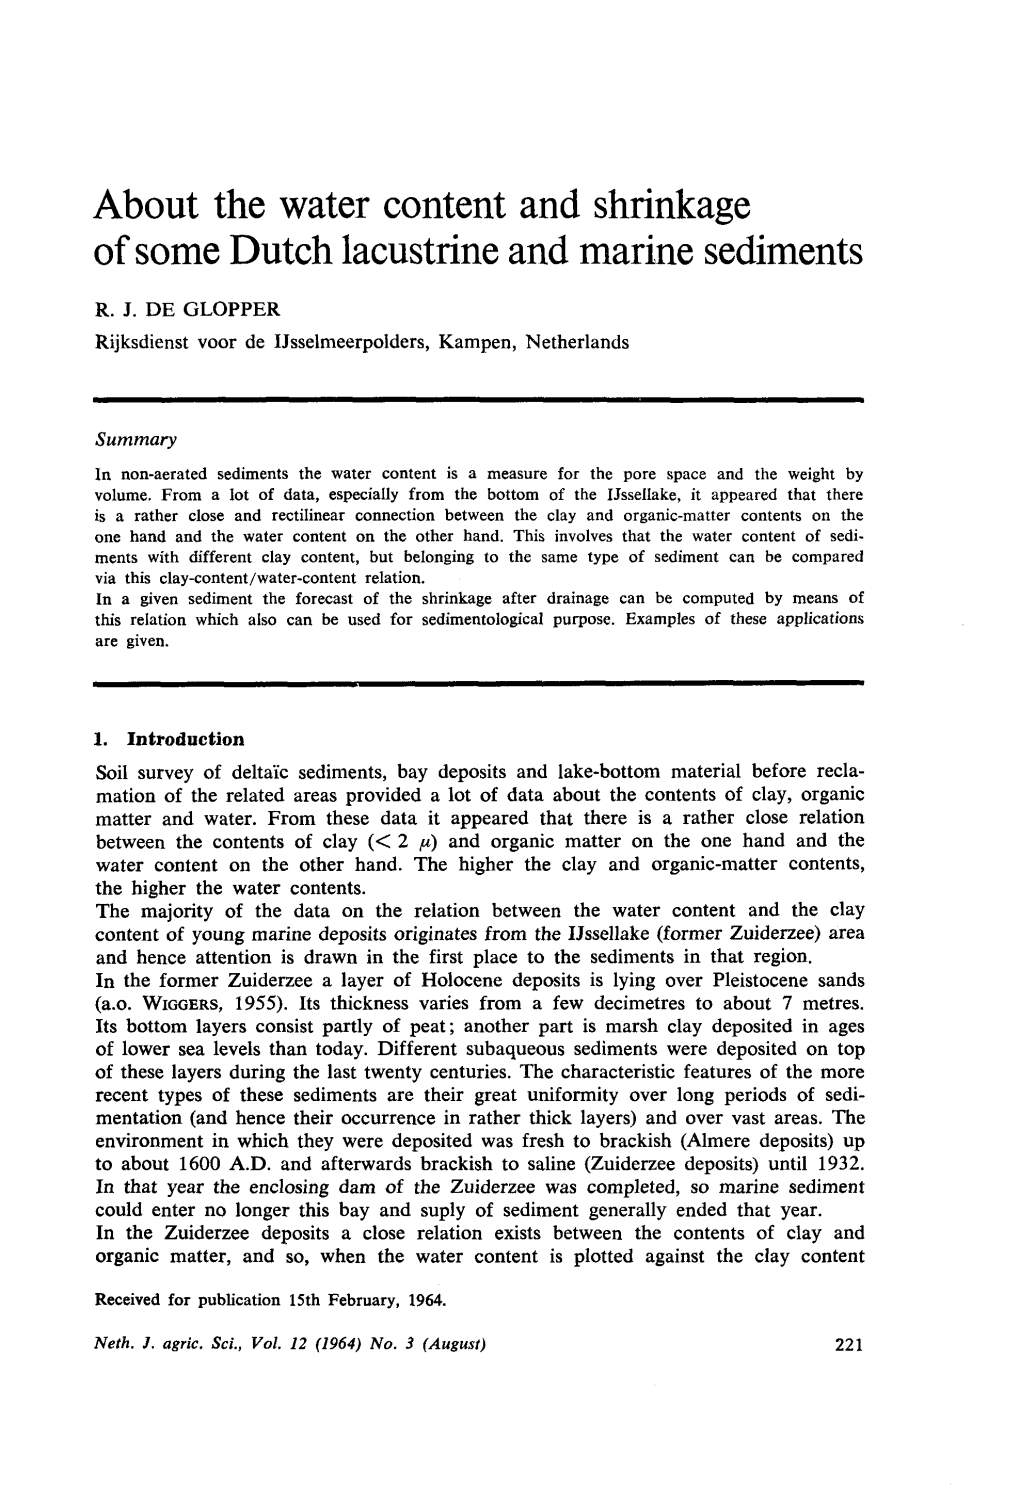 About the Water Content and Shrinkage of Some Dutch Lacustrine and Marine Sediments